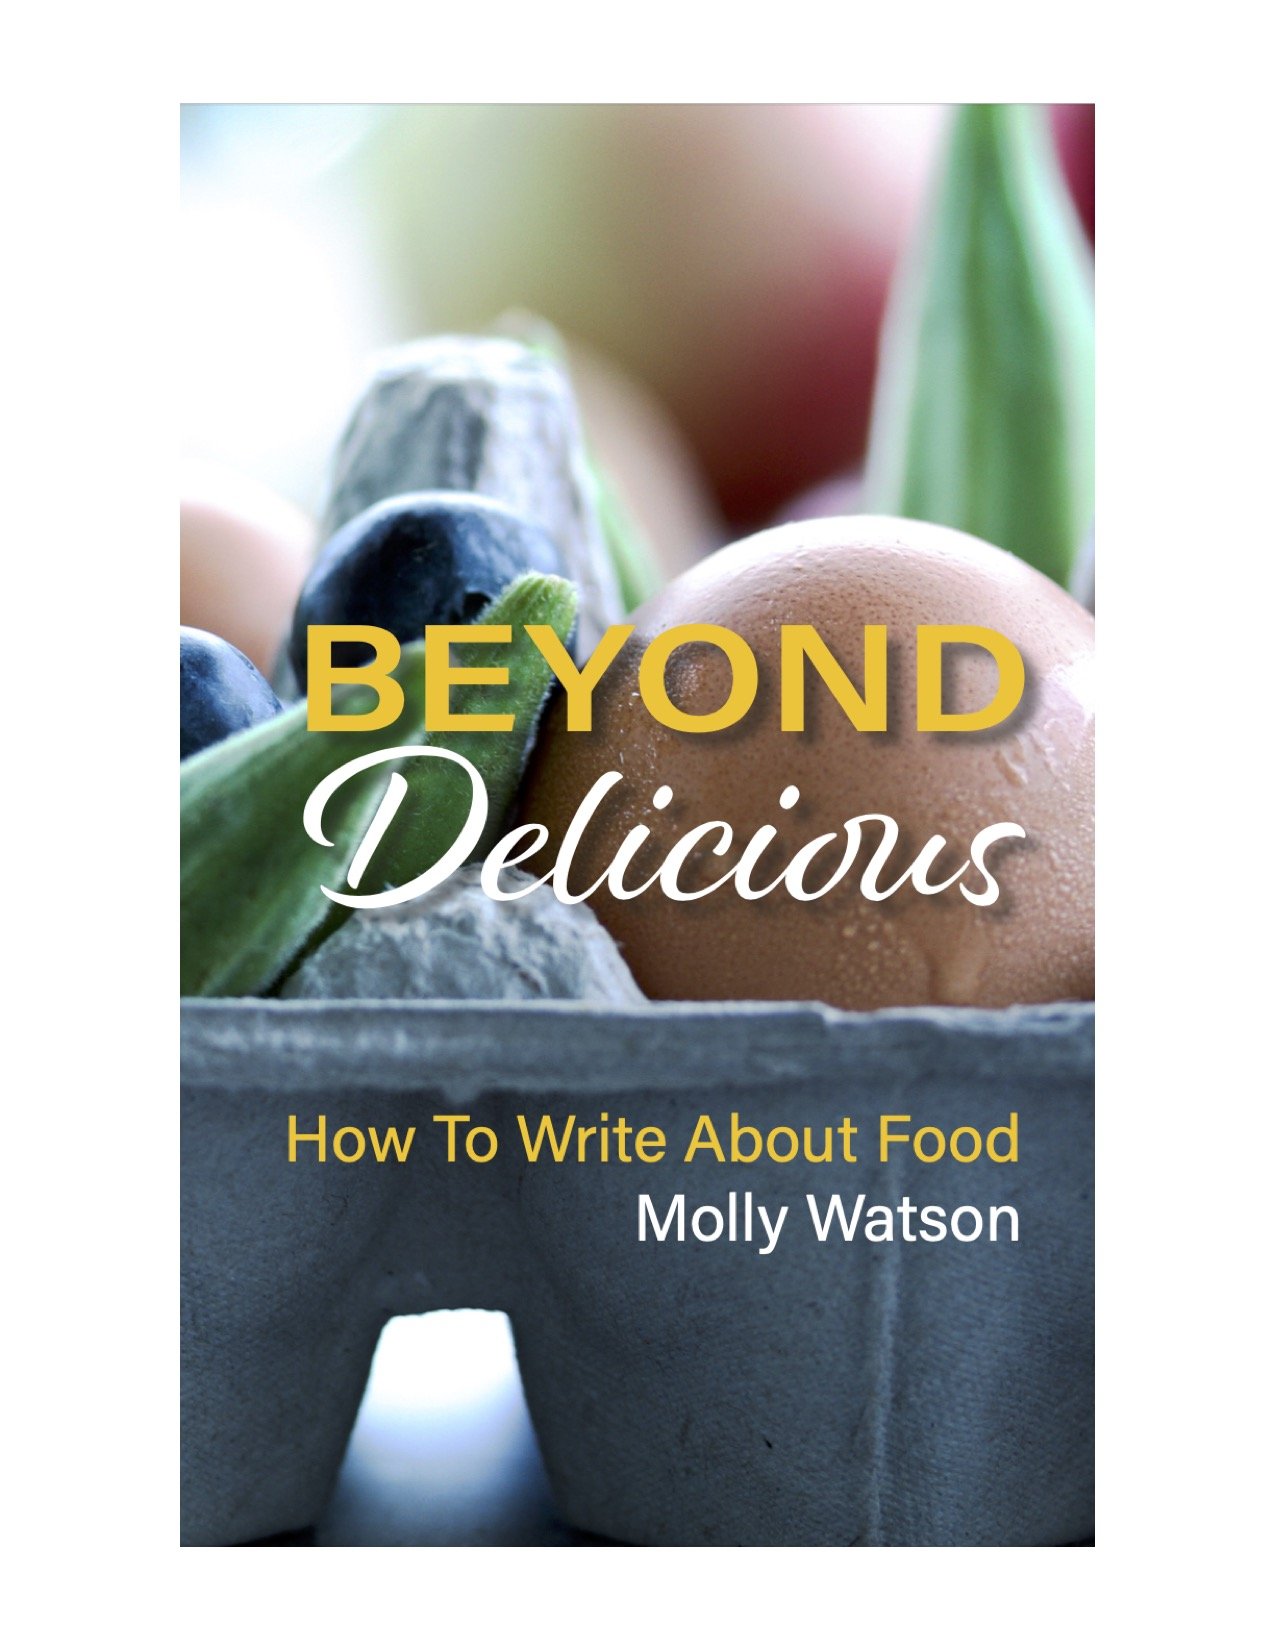 Beyond Delicious: How to Write About Food